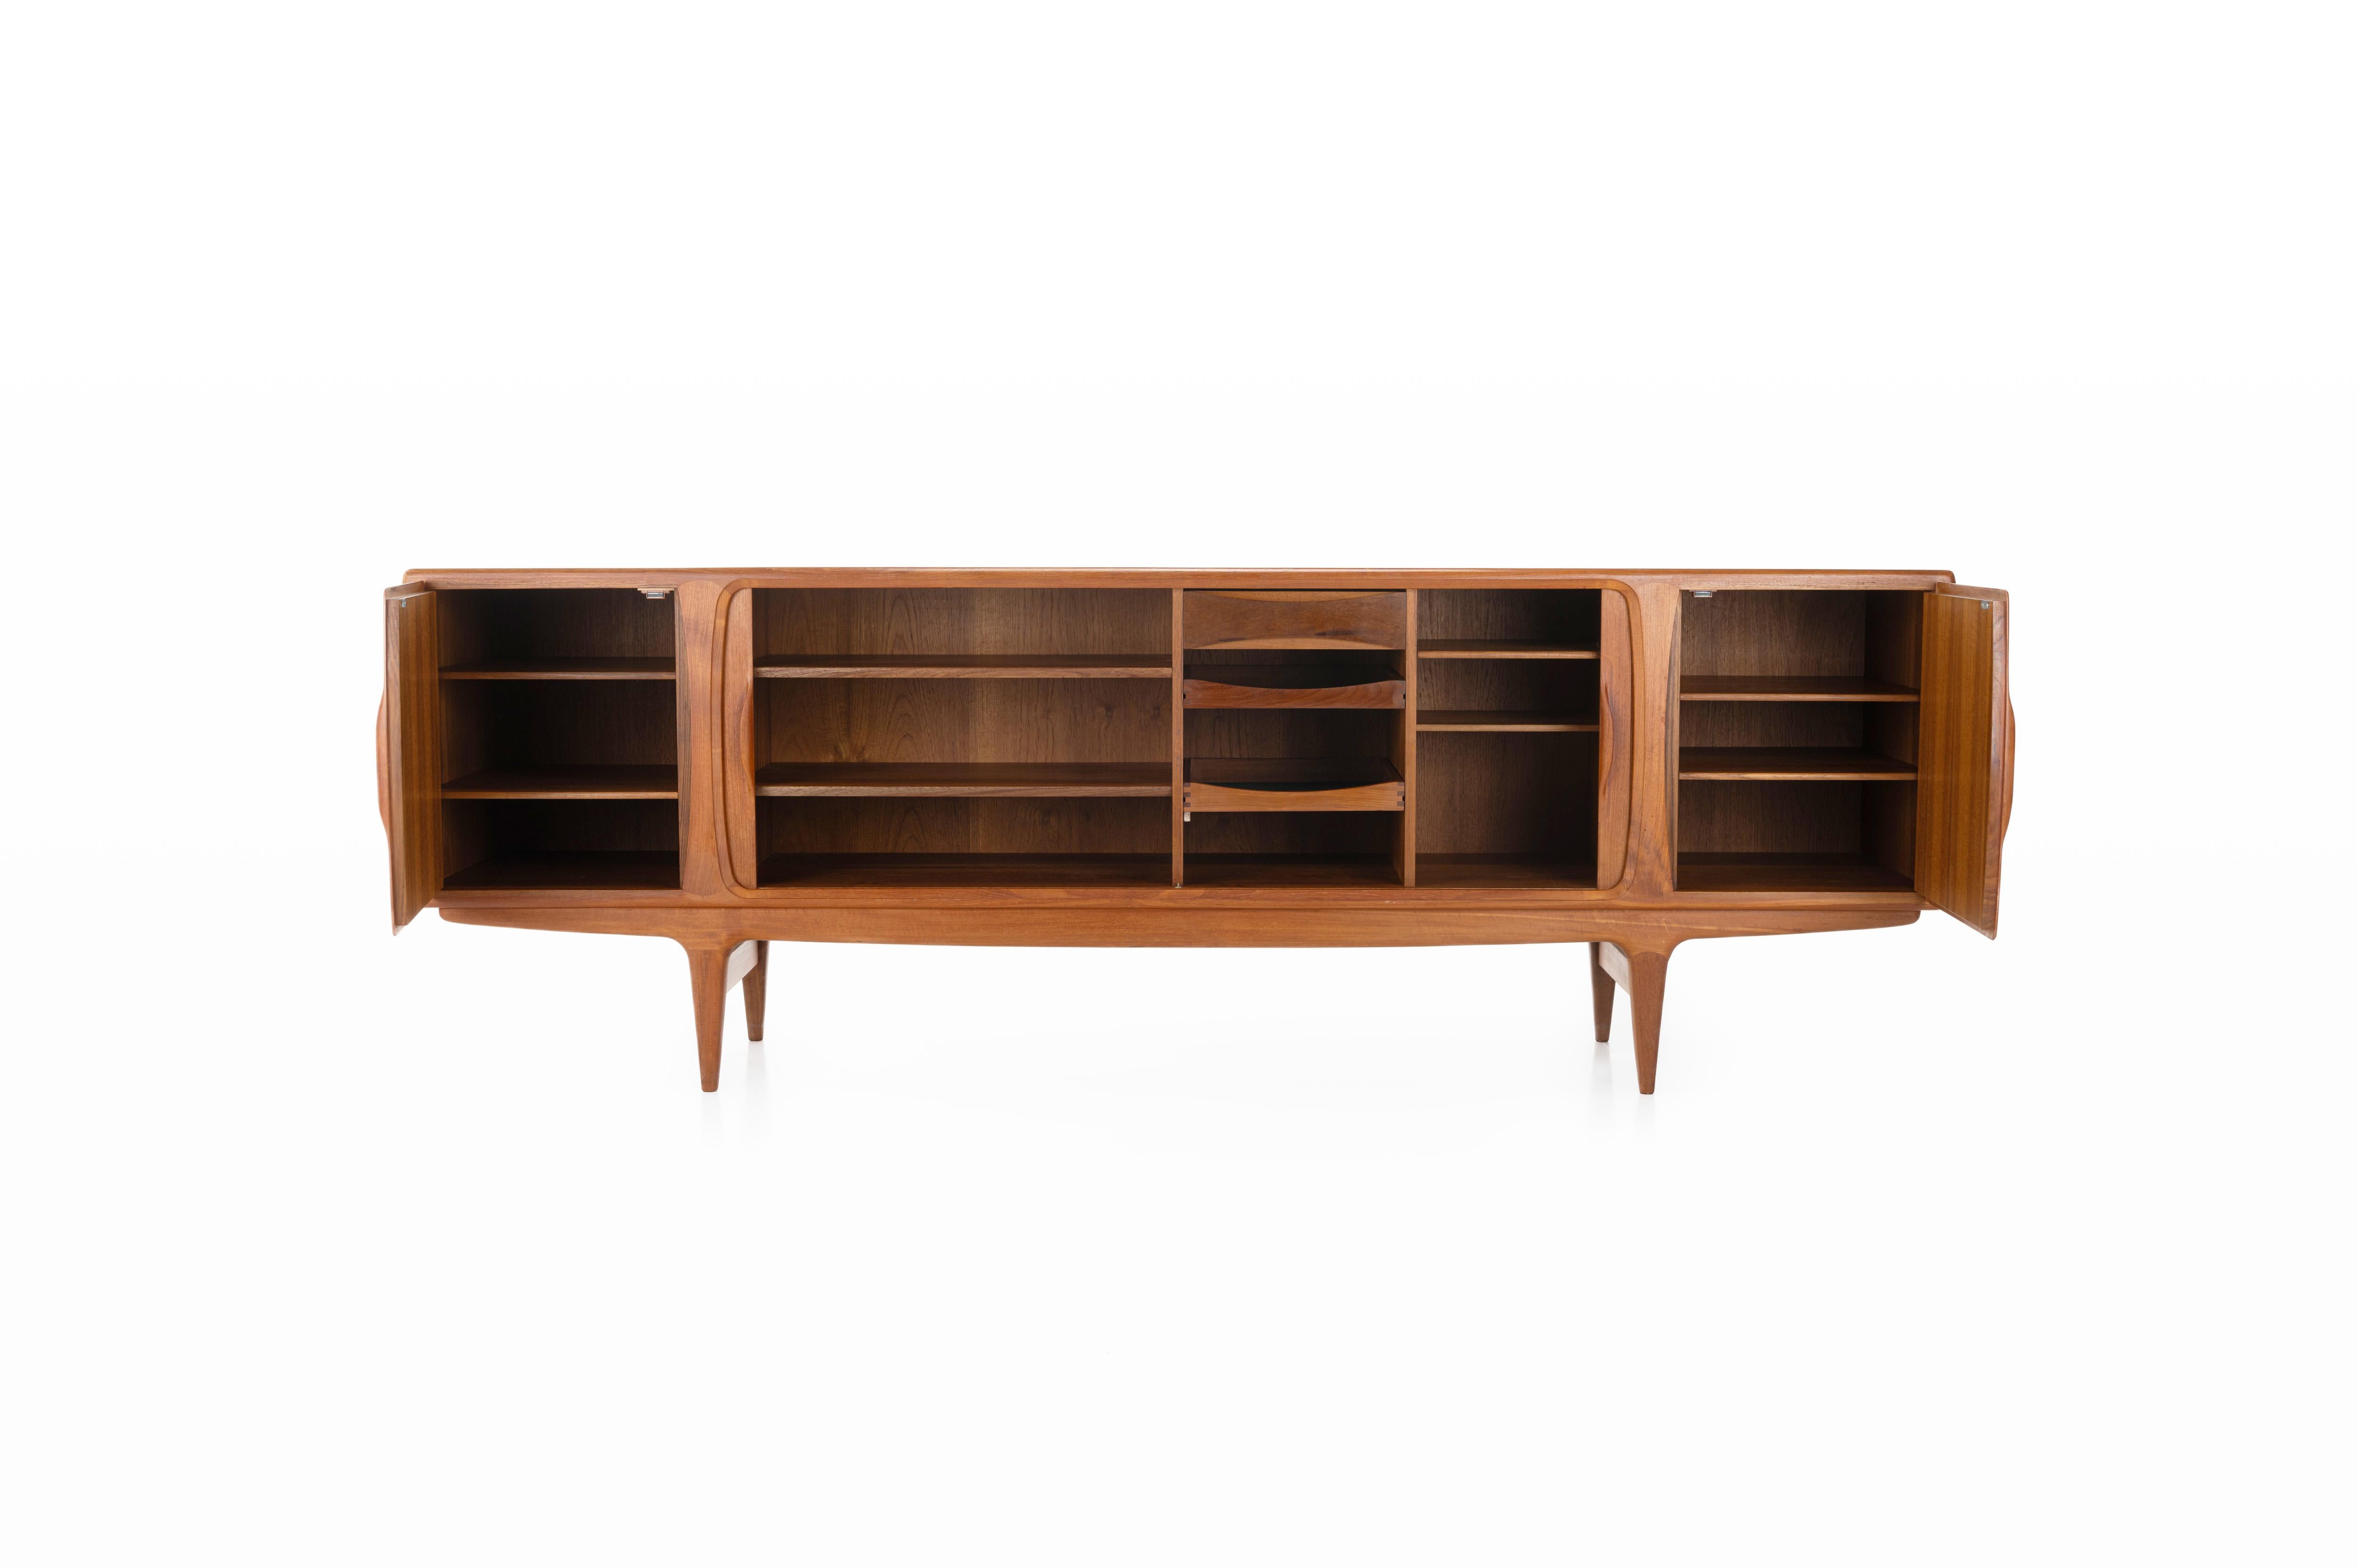 Magnificent sideboard in teak designed by Johannes Andersen for Uldum Møbelfabrik, Denmark 1960s. This sideboard has four tambour doors, two doors and plenty of storage space.

Dimensions:
W: 245 cm
D: 52 cm
H: 83,5 cm